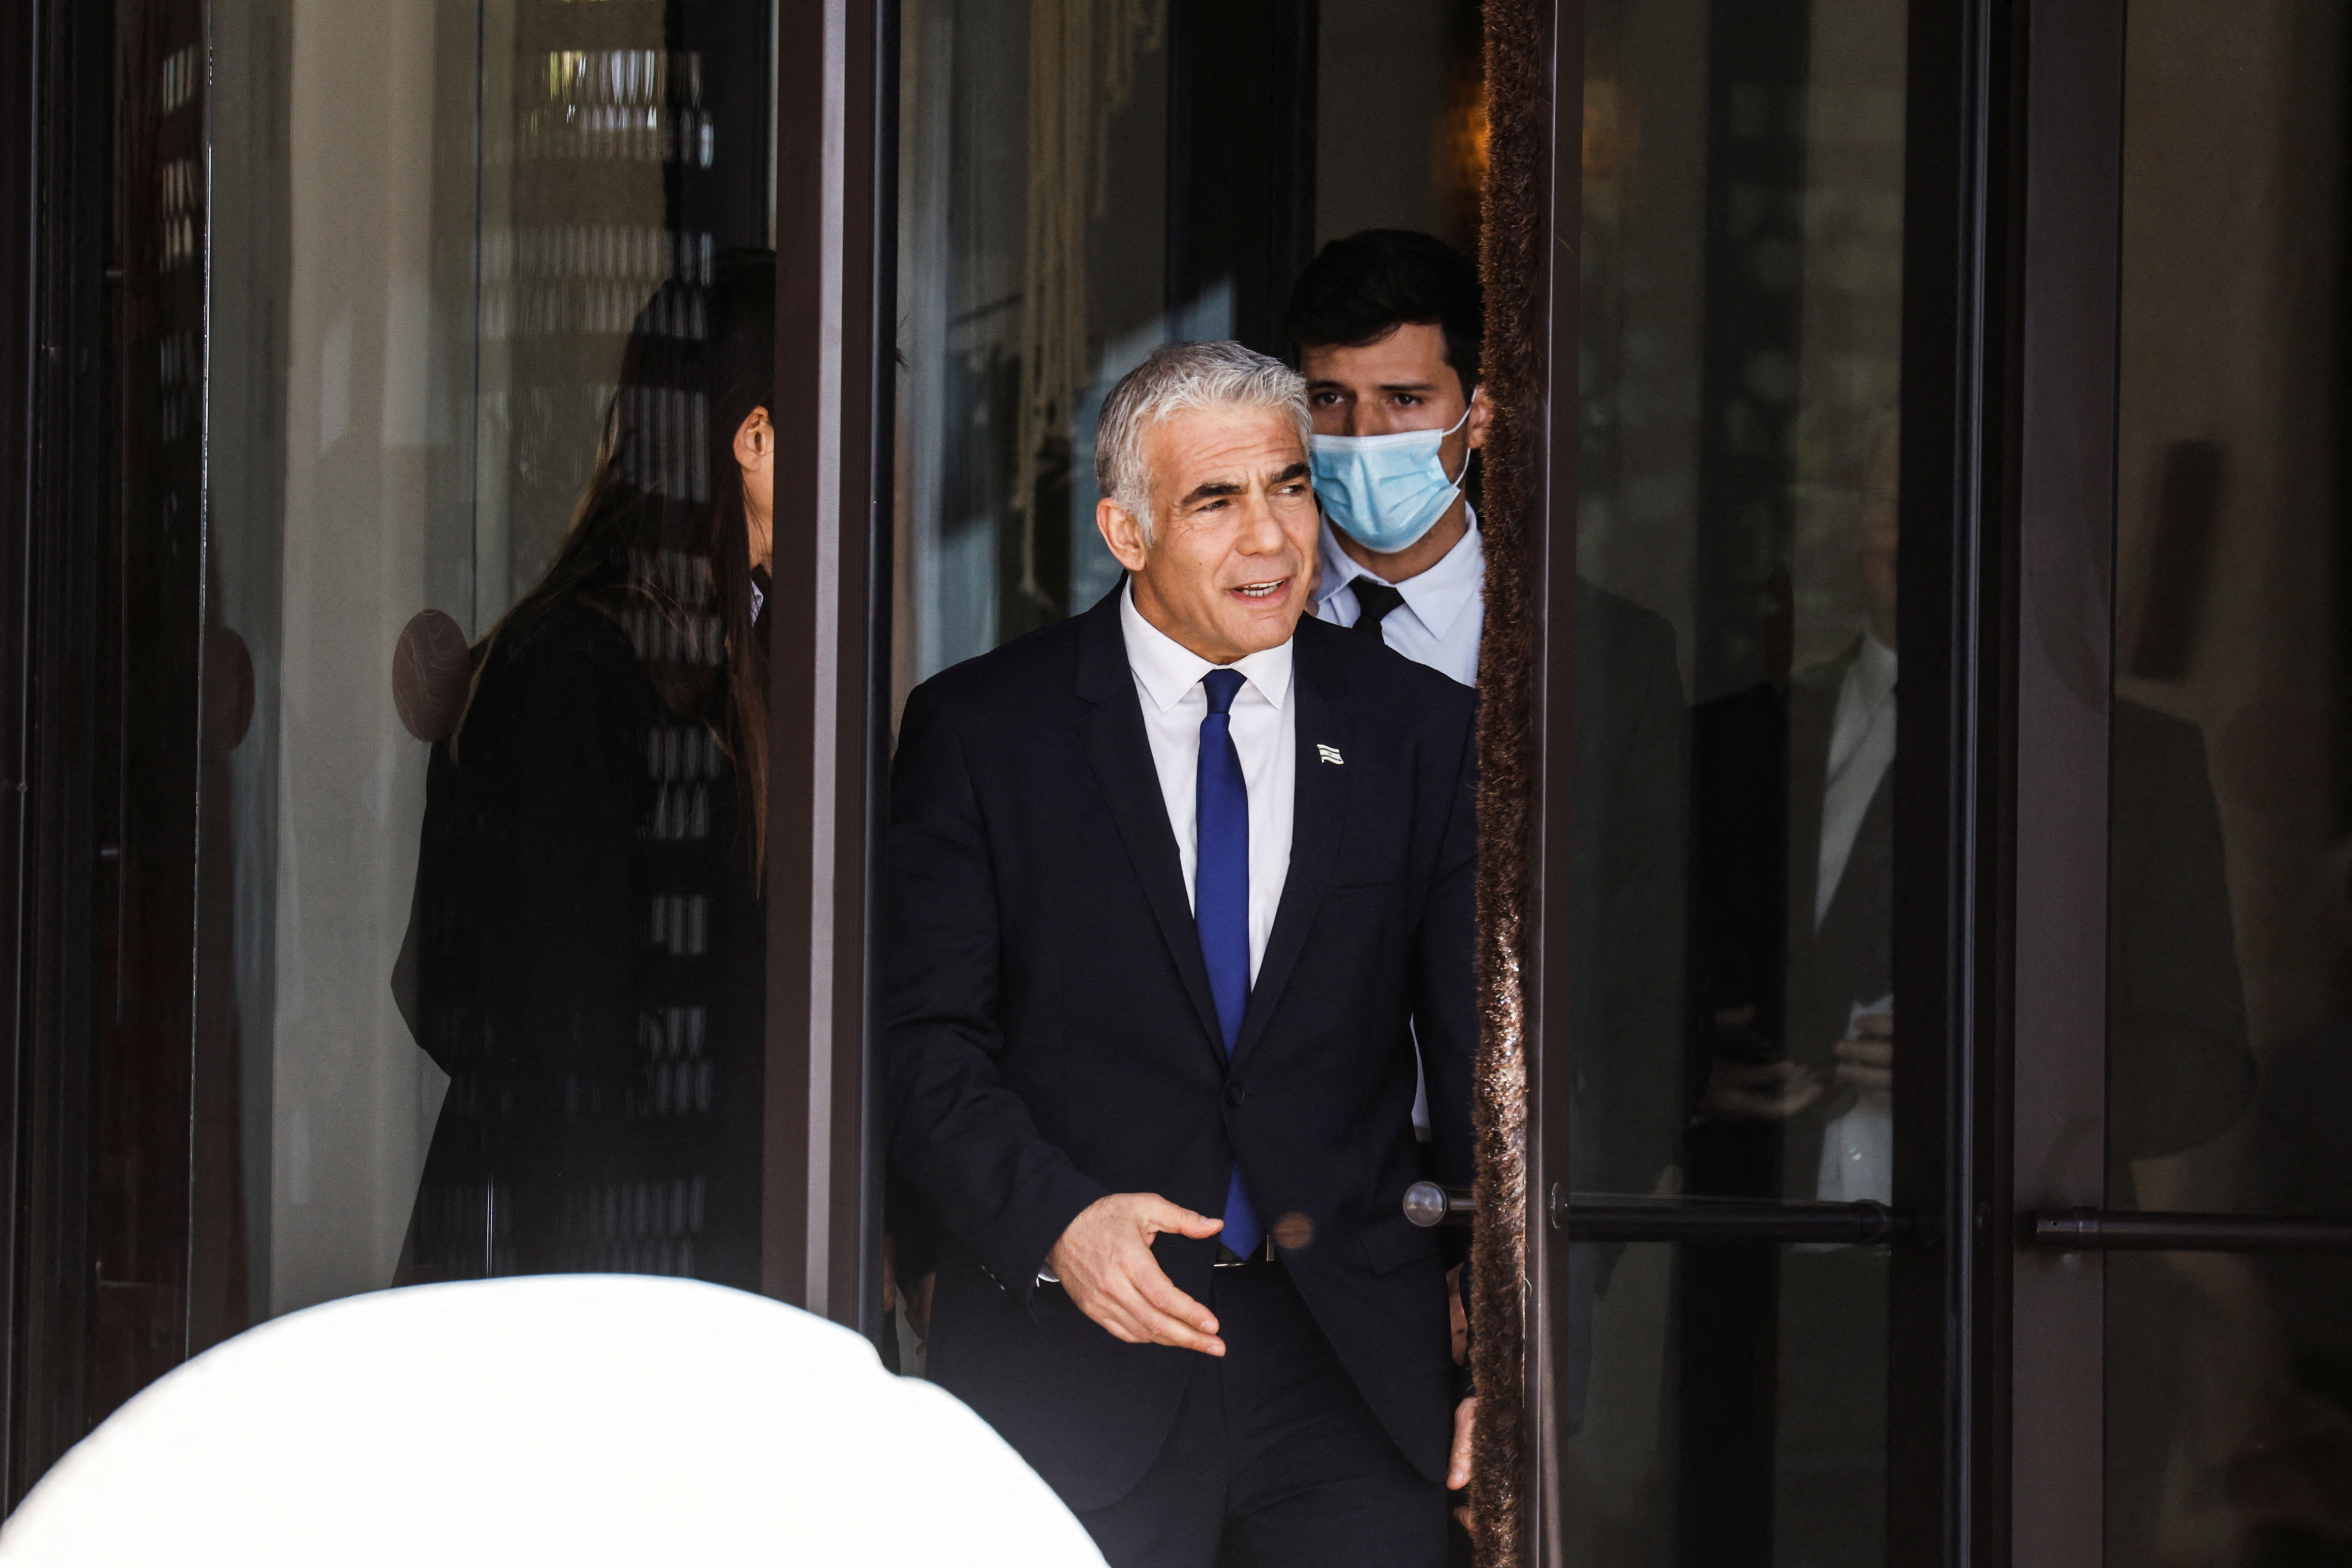 Israel's Foreign Minister Yair Lapid departs the Kedma Hotel, the location of 